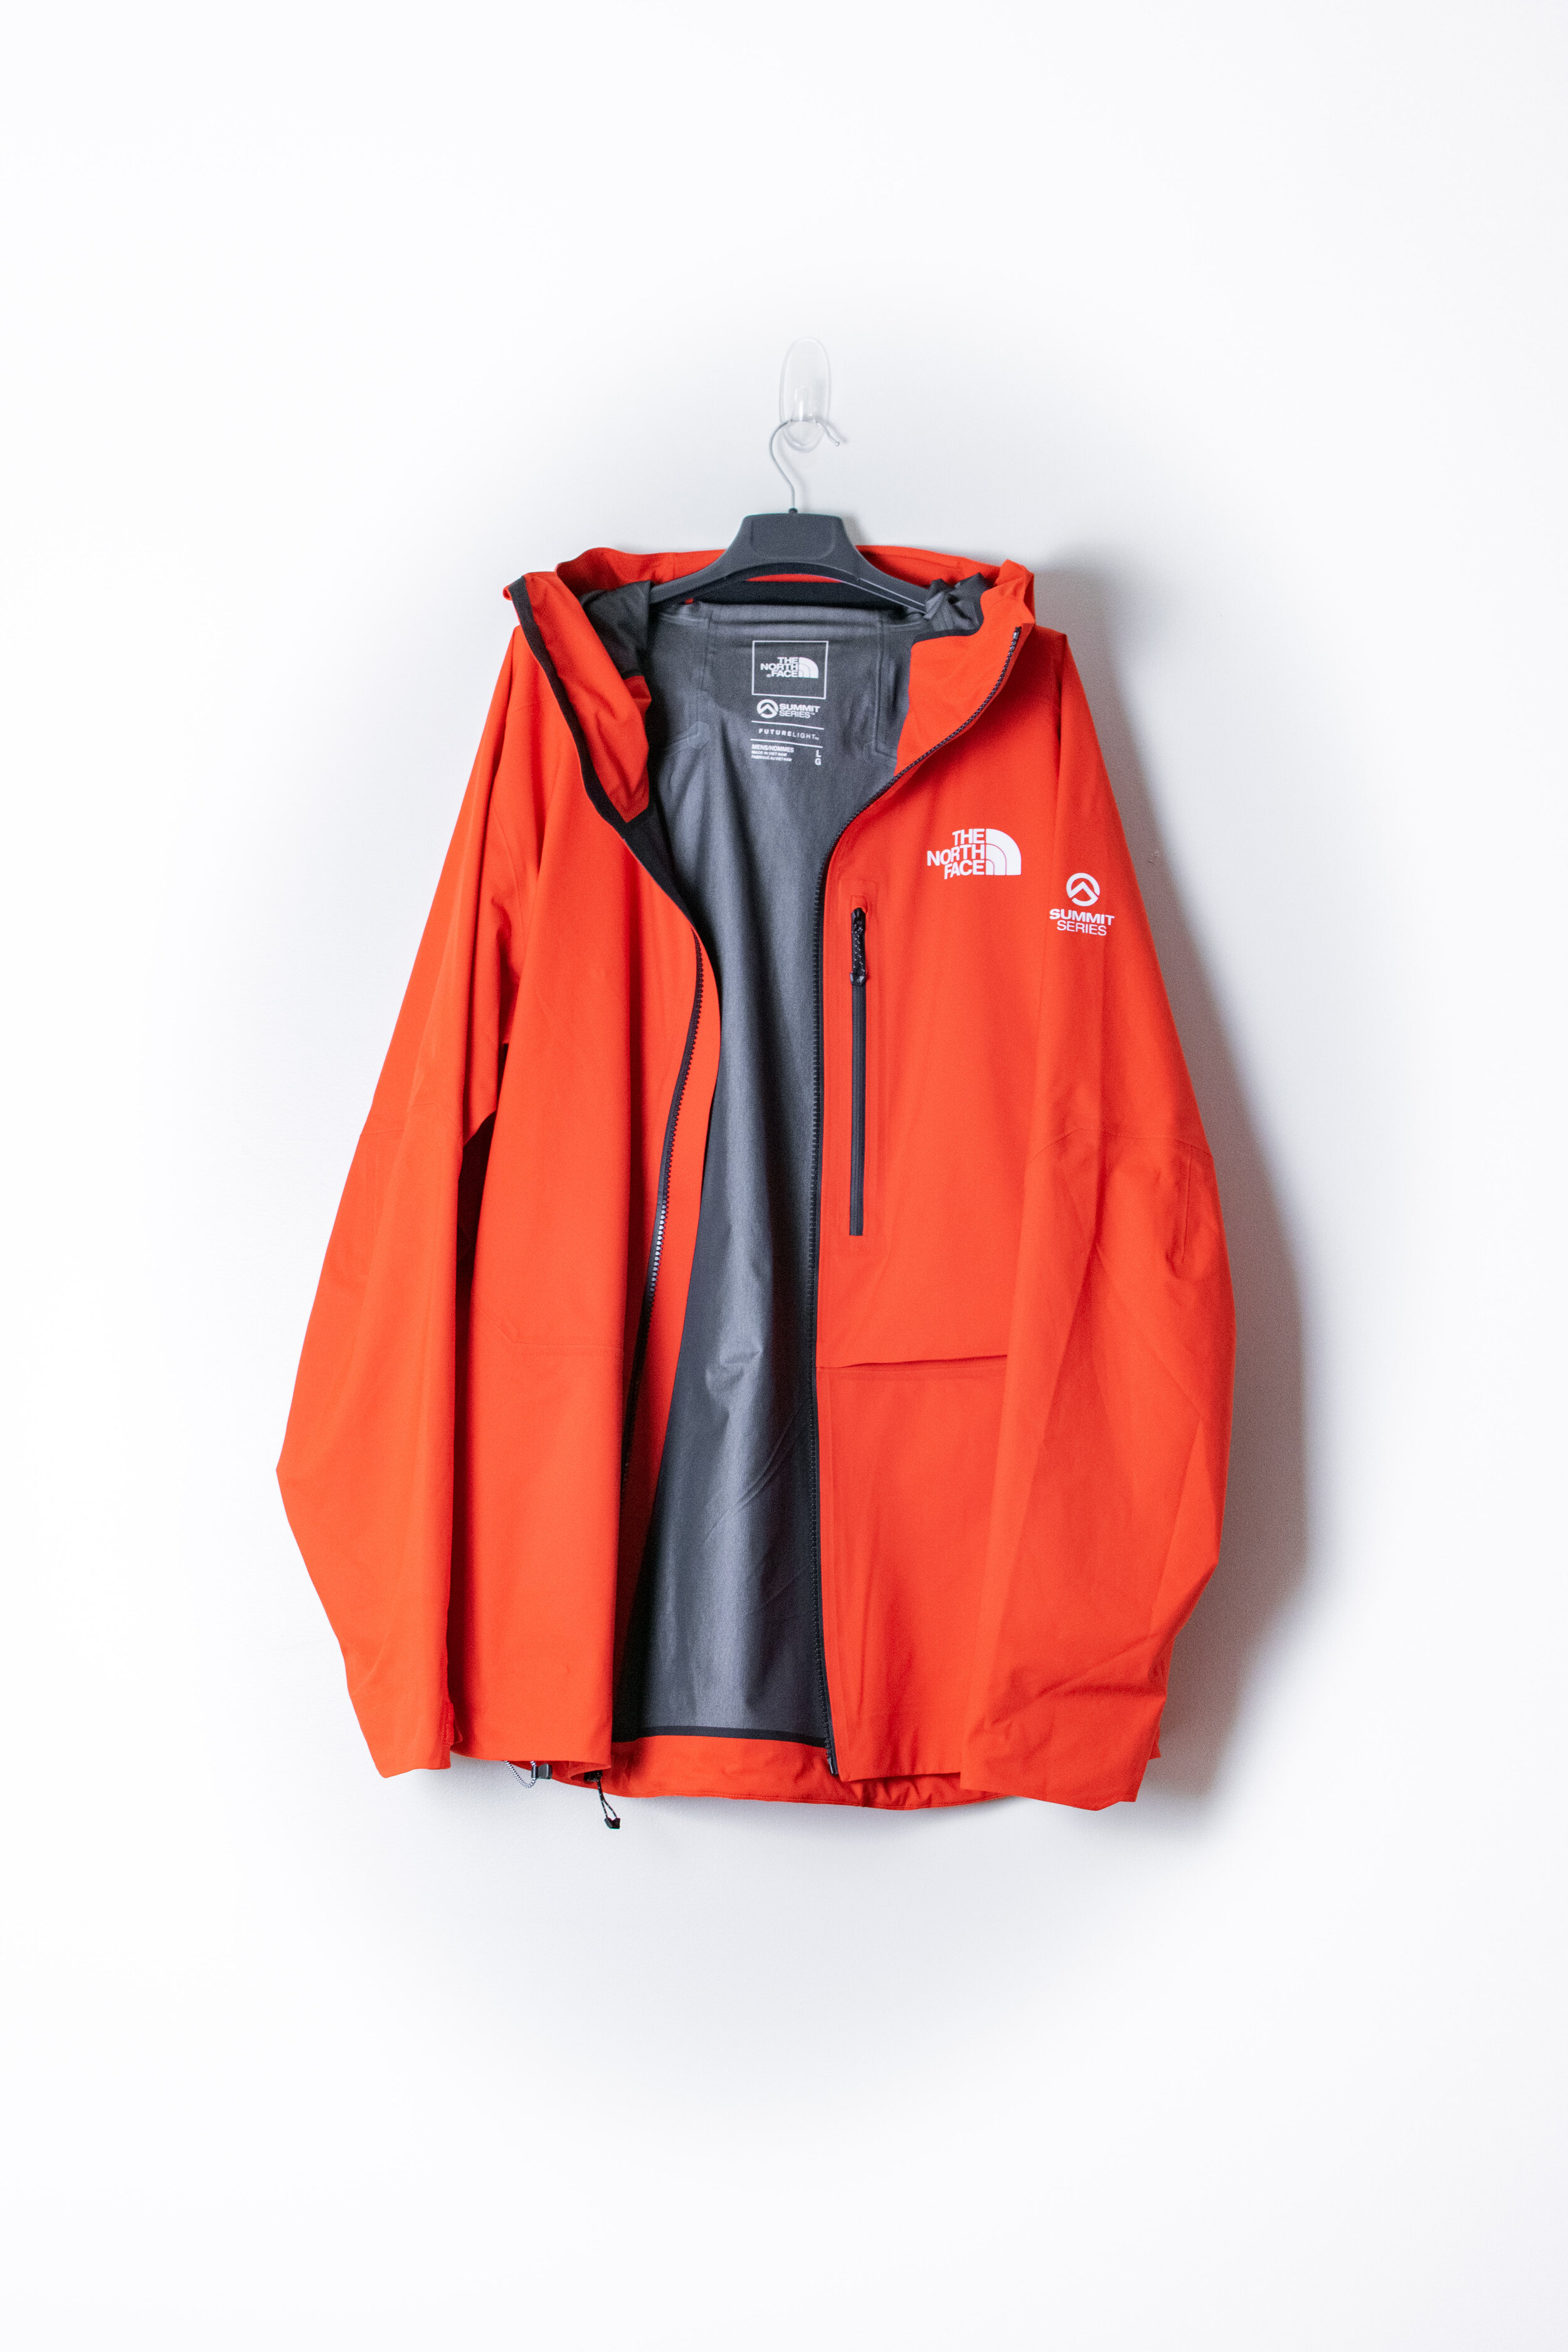 north face l5 jacket review